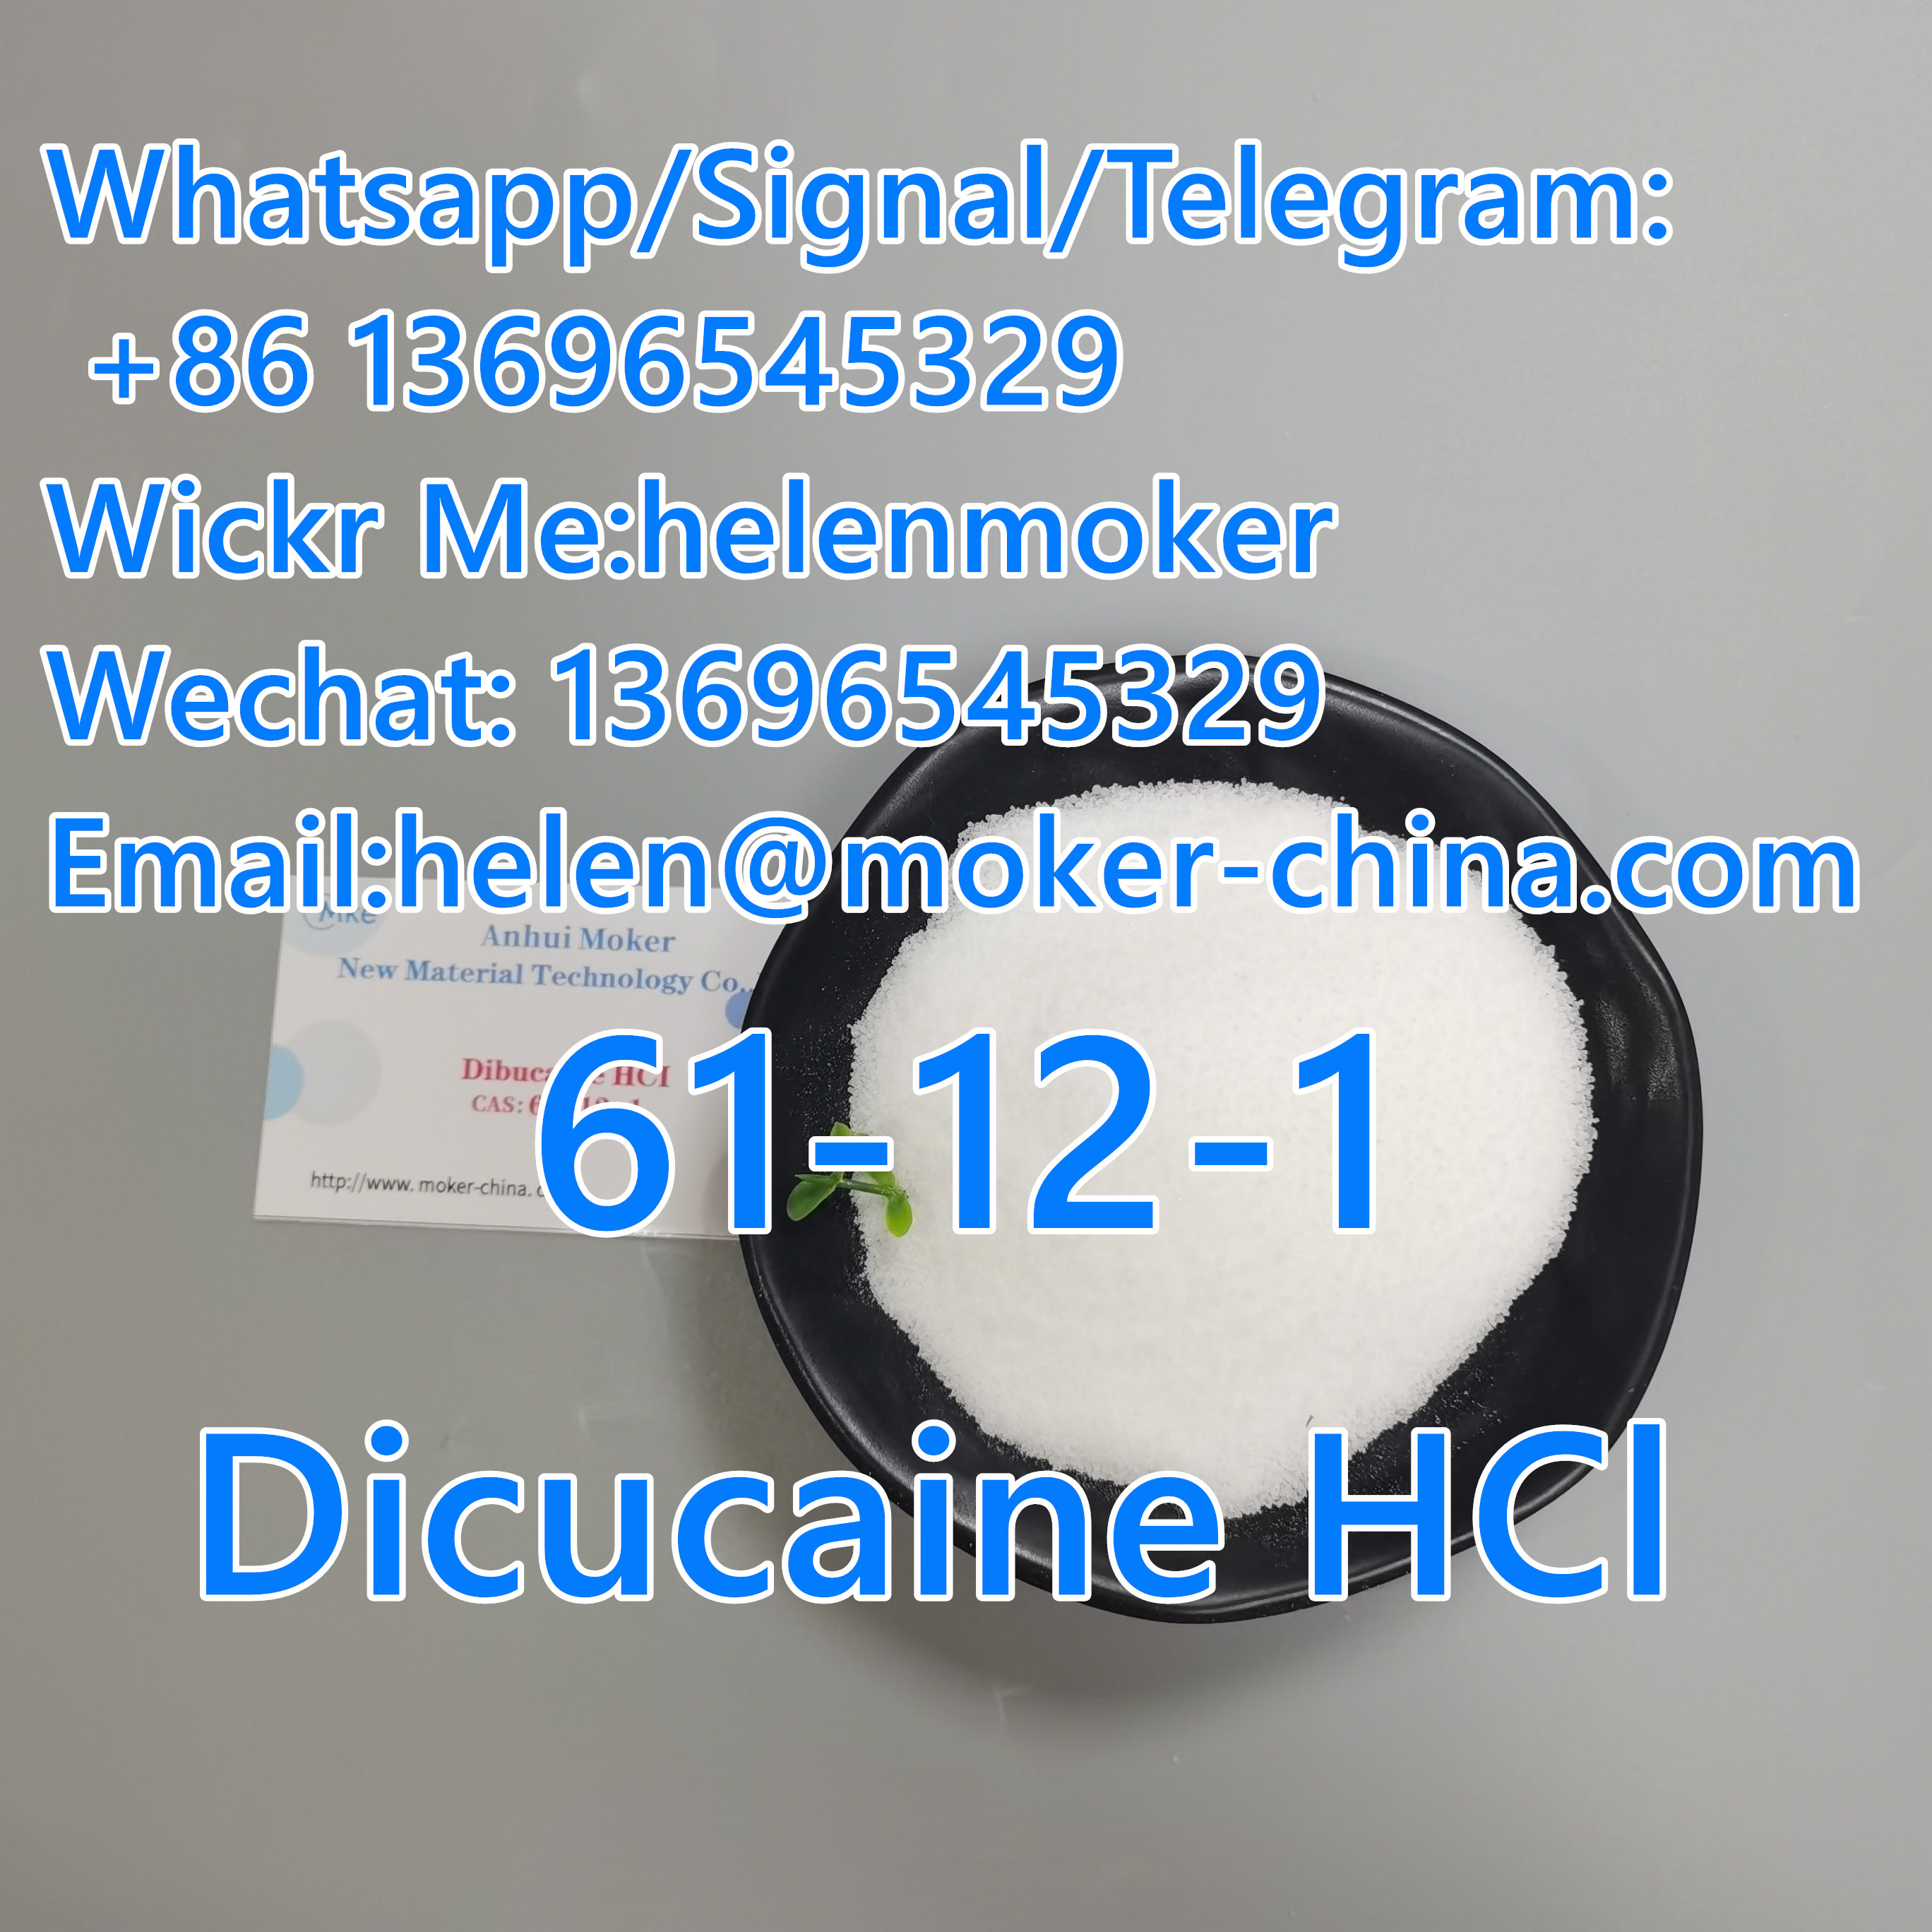 Popular Product Dibucaine Hydrochloride CAS 61-12-1 with Low Price